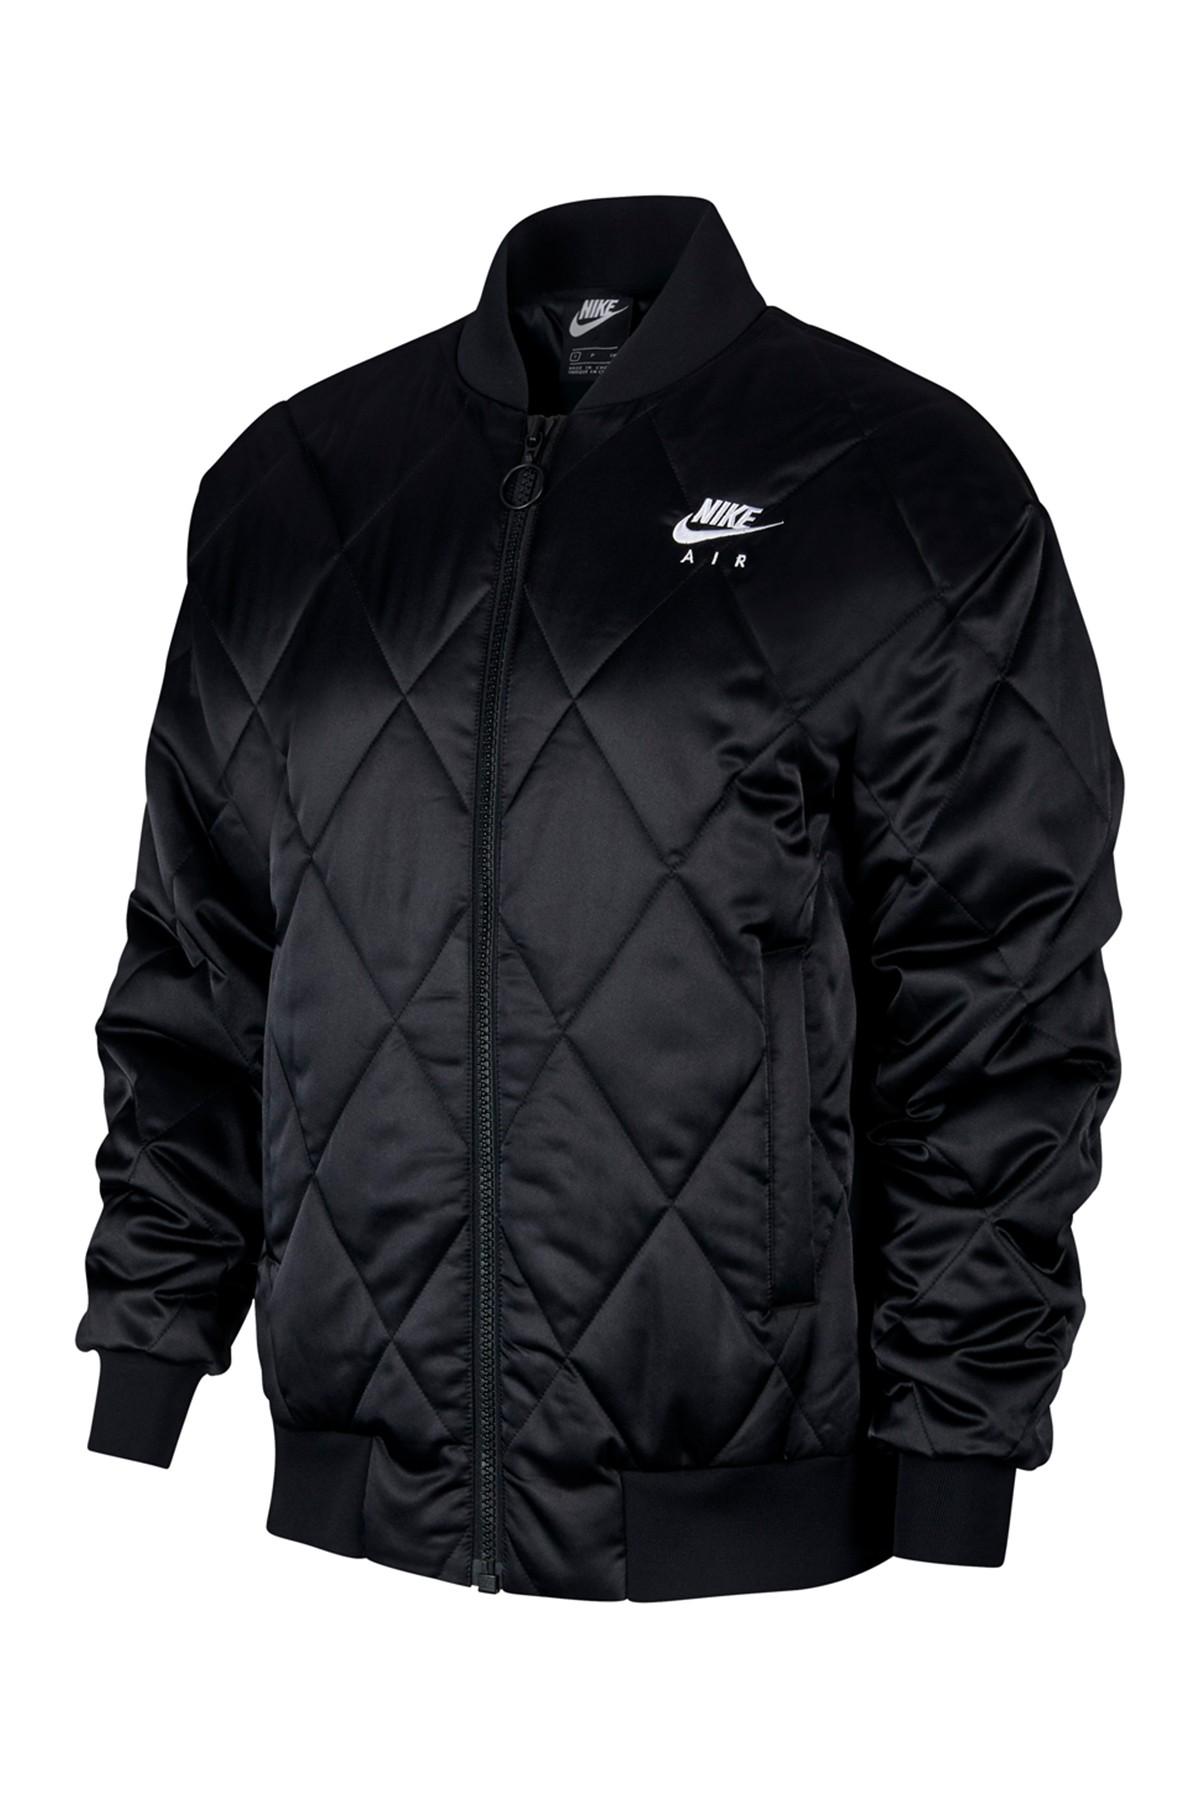 Nike Air Quilted Satin Jacket in Black 